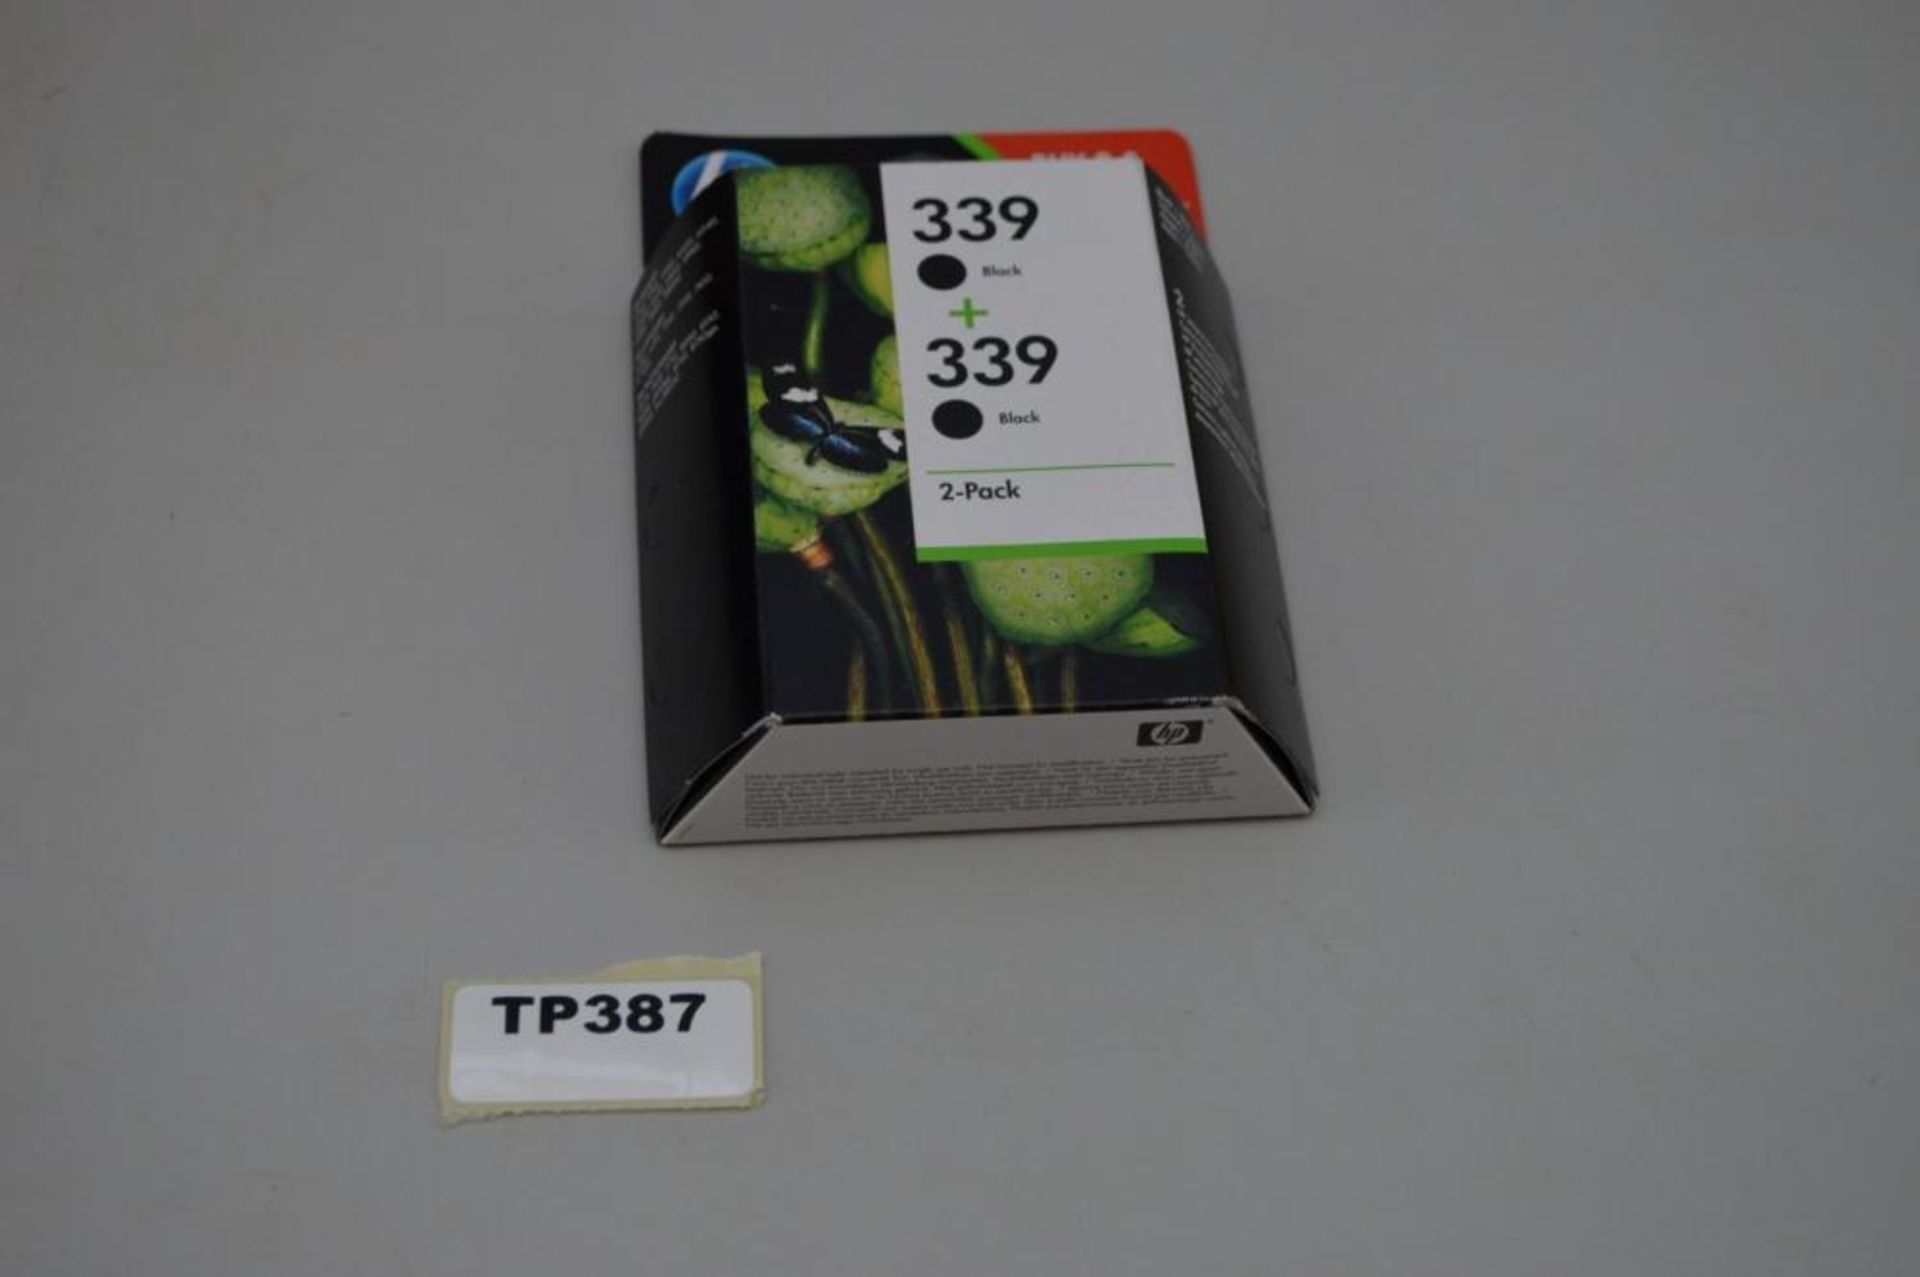 1 x HP 339 Black Printer Ink Cartridge Twin Pack New In Box - Ref TP387 - CL394 - Location: Altrinch